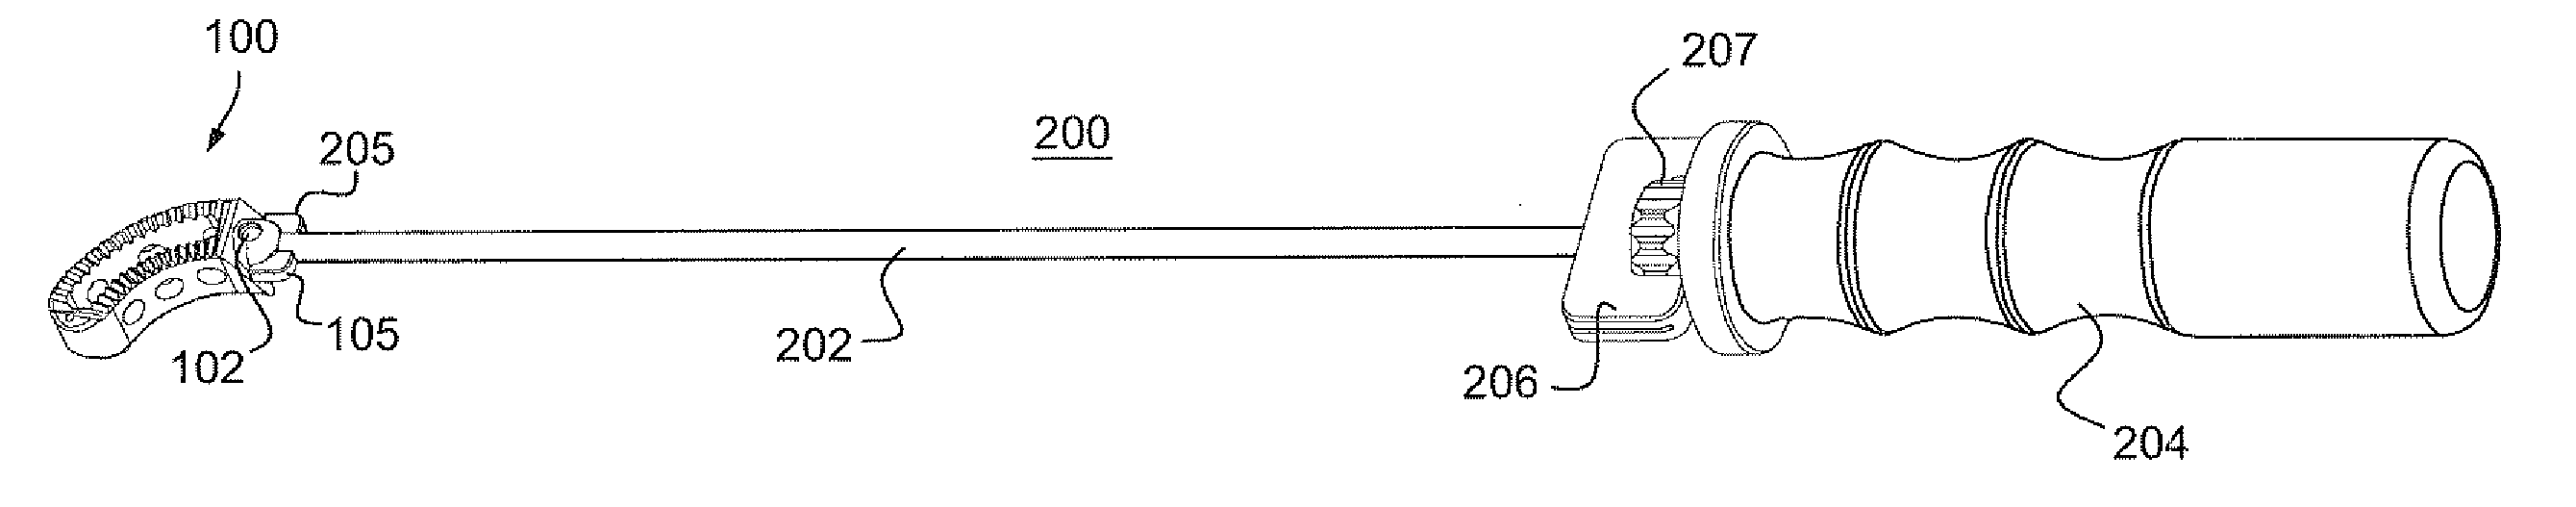 Spine implant insertion device and method